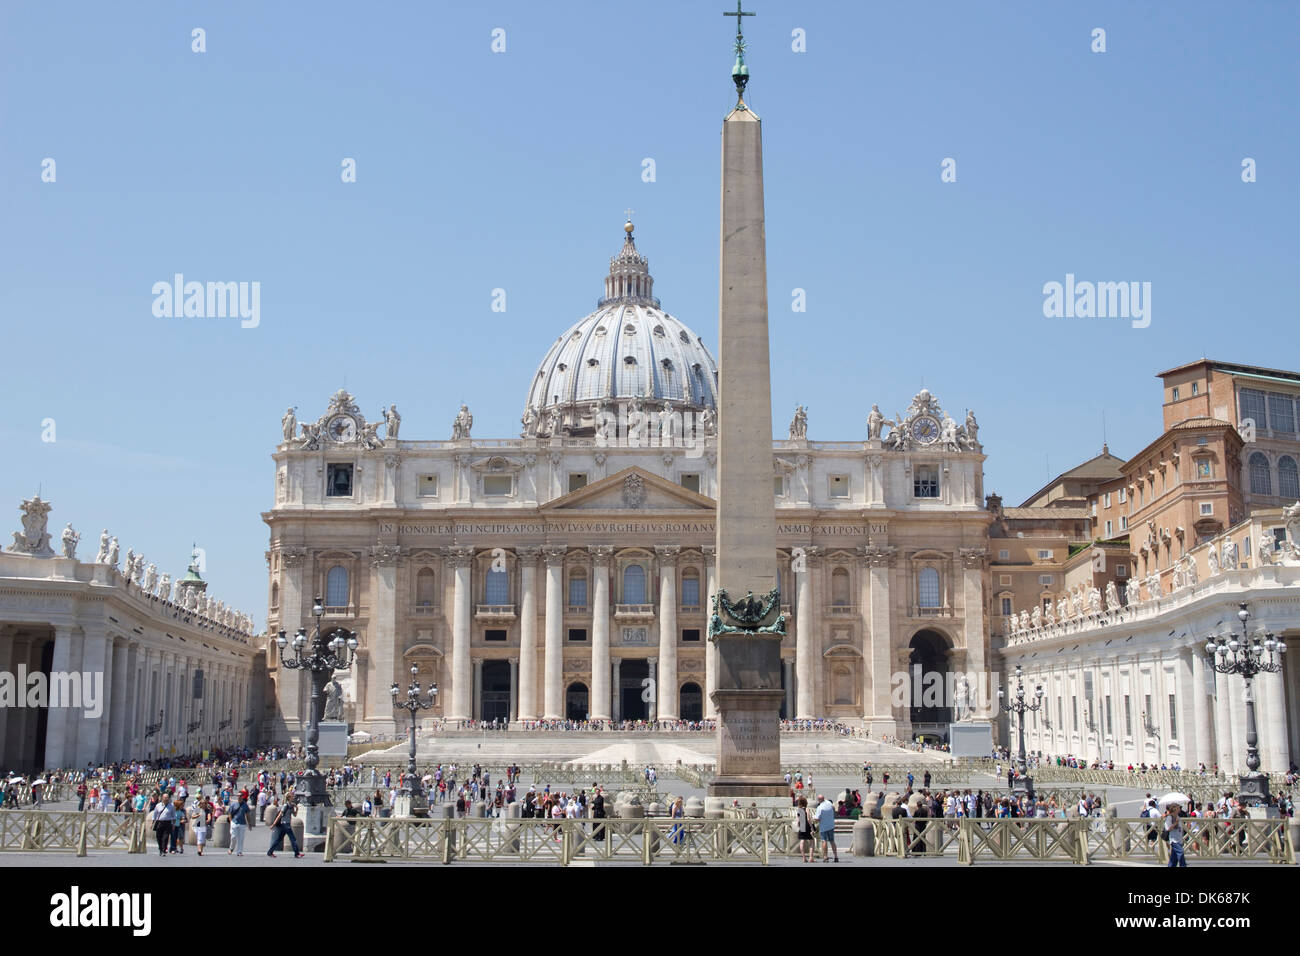 St. Peter's Basilica in St. Peter's Square, Vatican City with the famous four-thousand-year-old Egyptian obelisk. Stock Photo